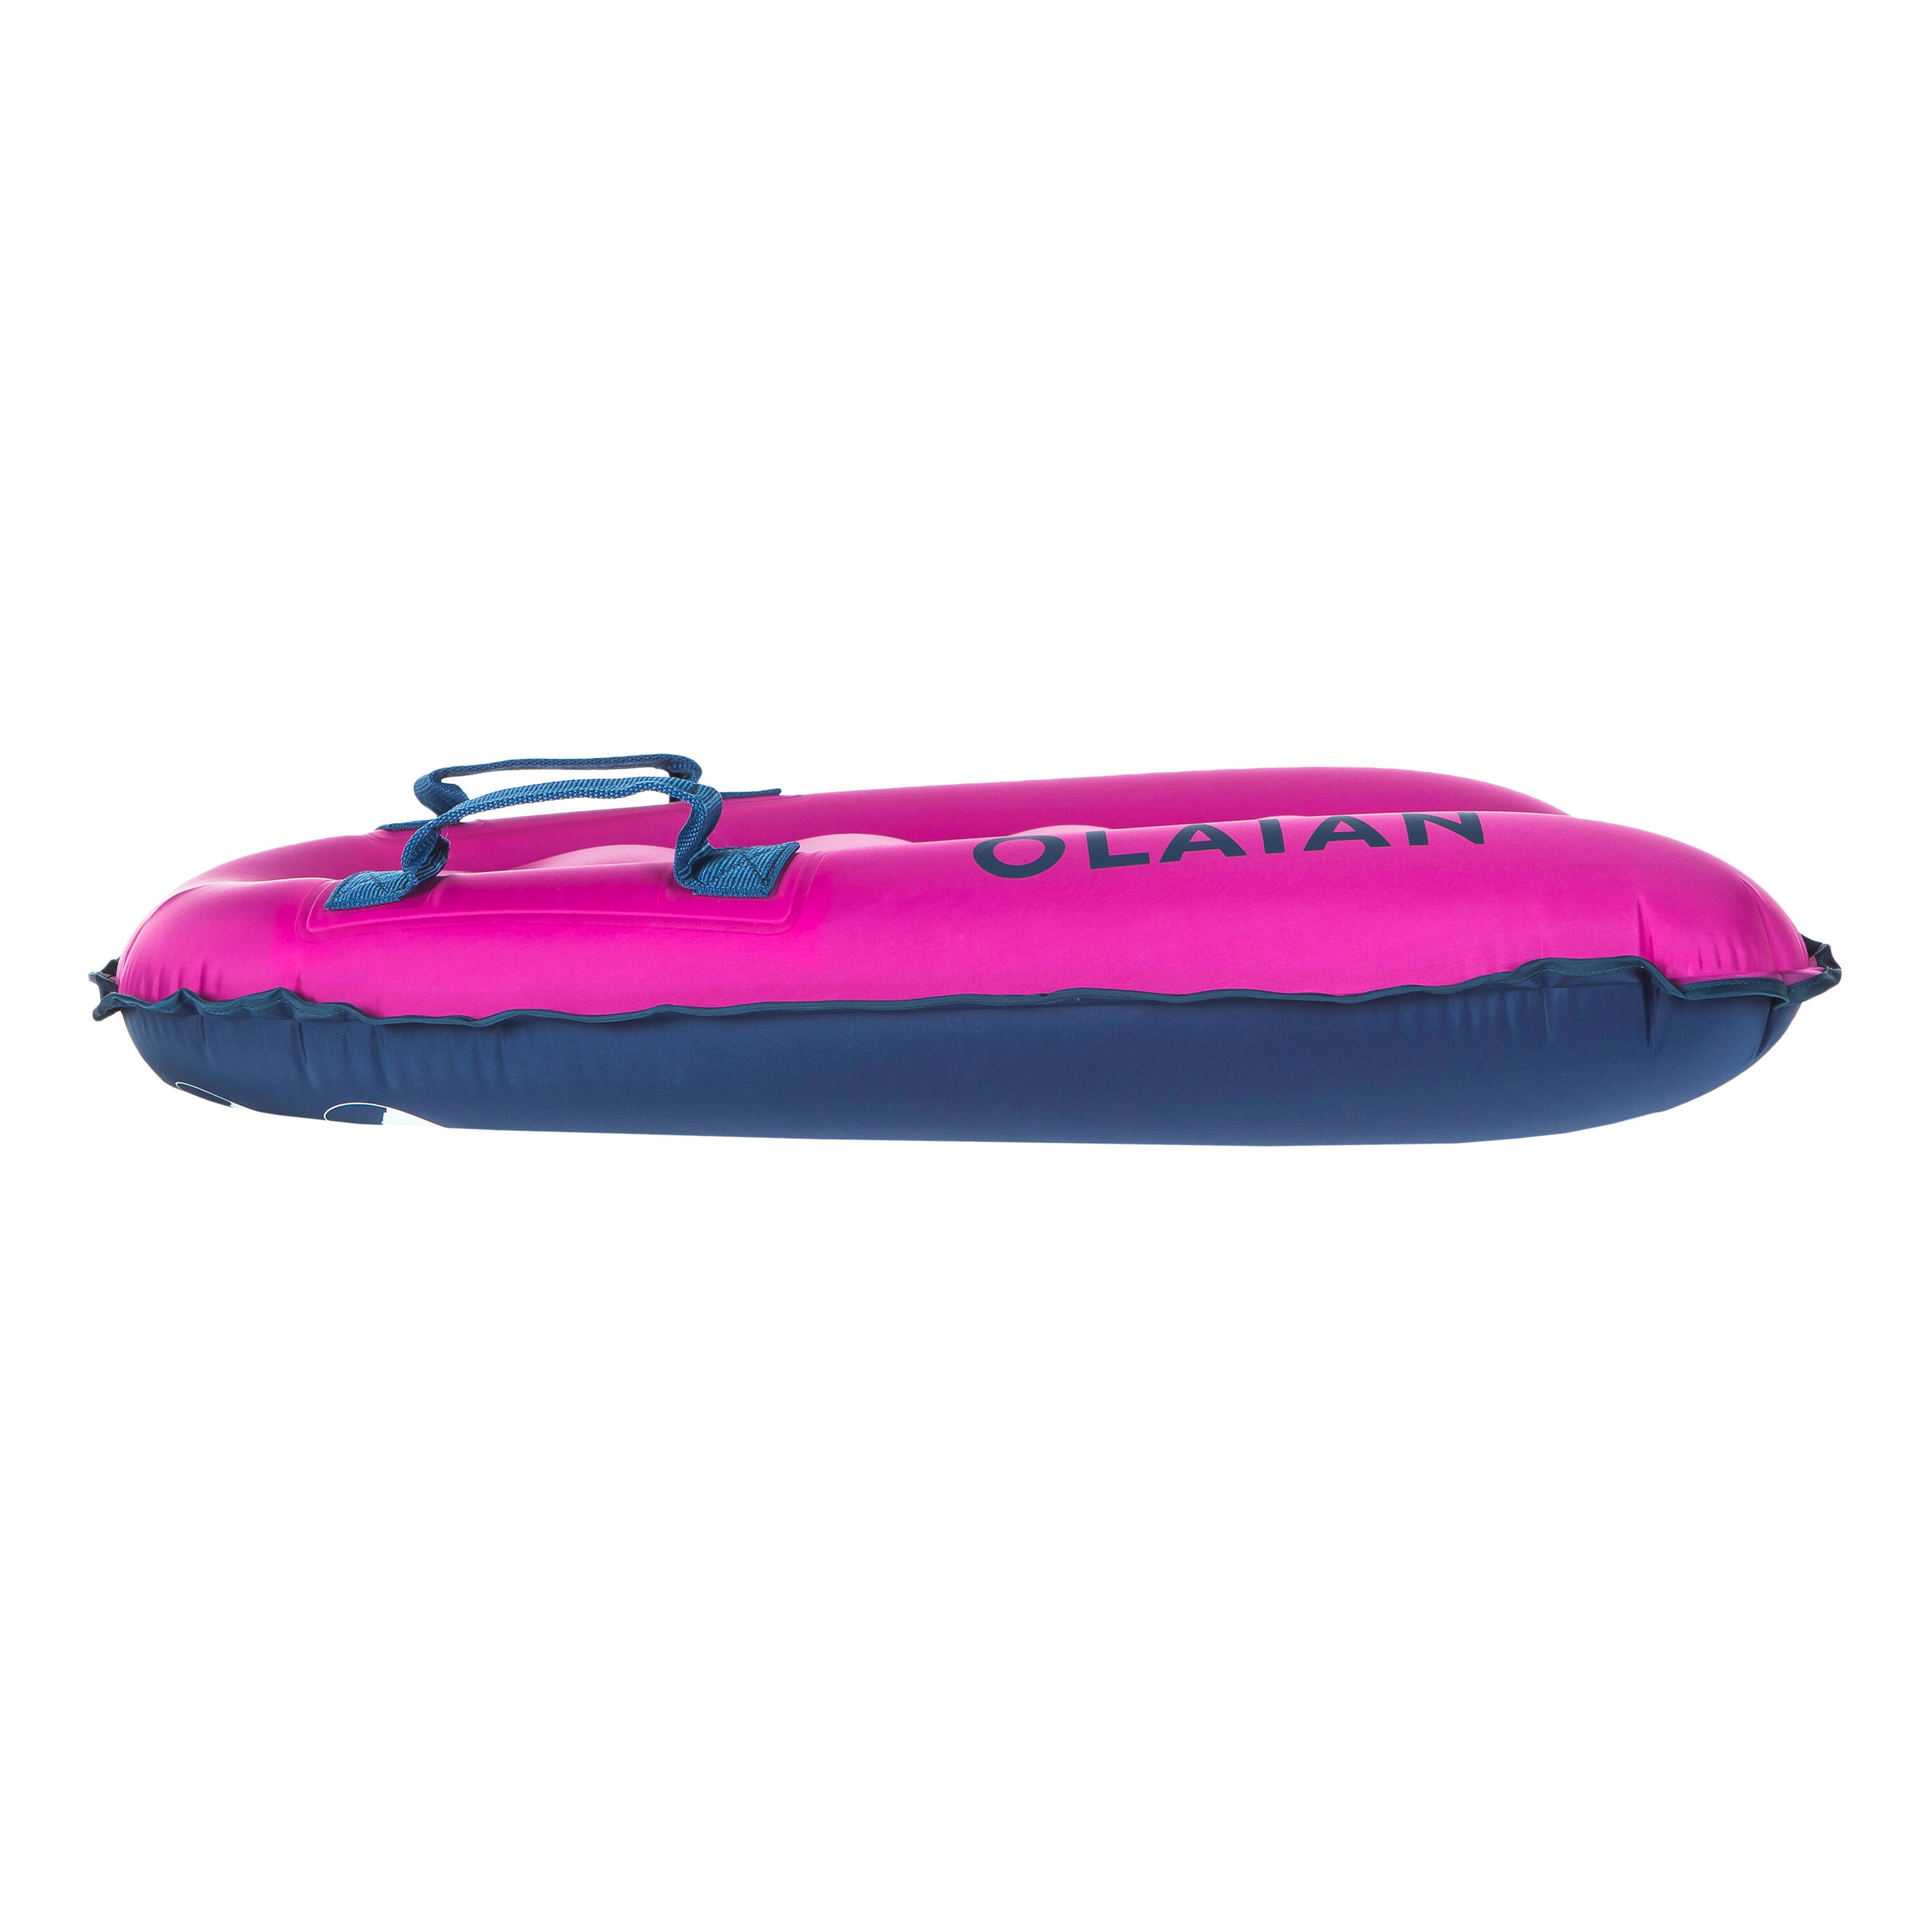 Kid's inflatable bodyboard for 4-8 year-olds (15-25 kg) - pink 7/12